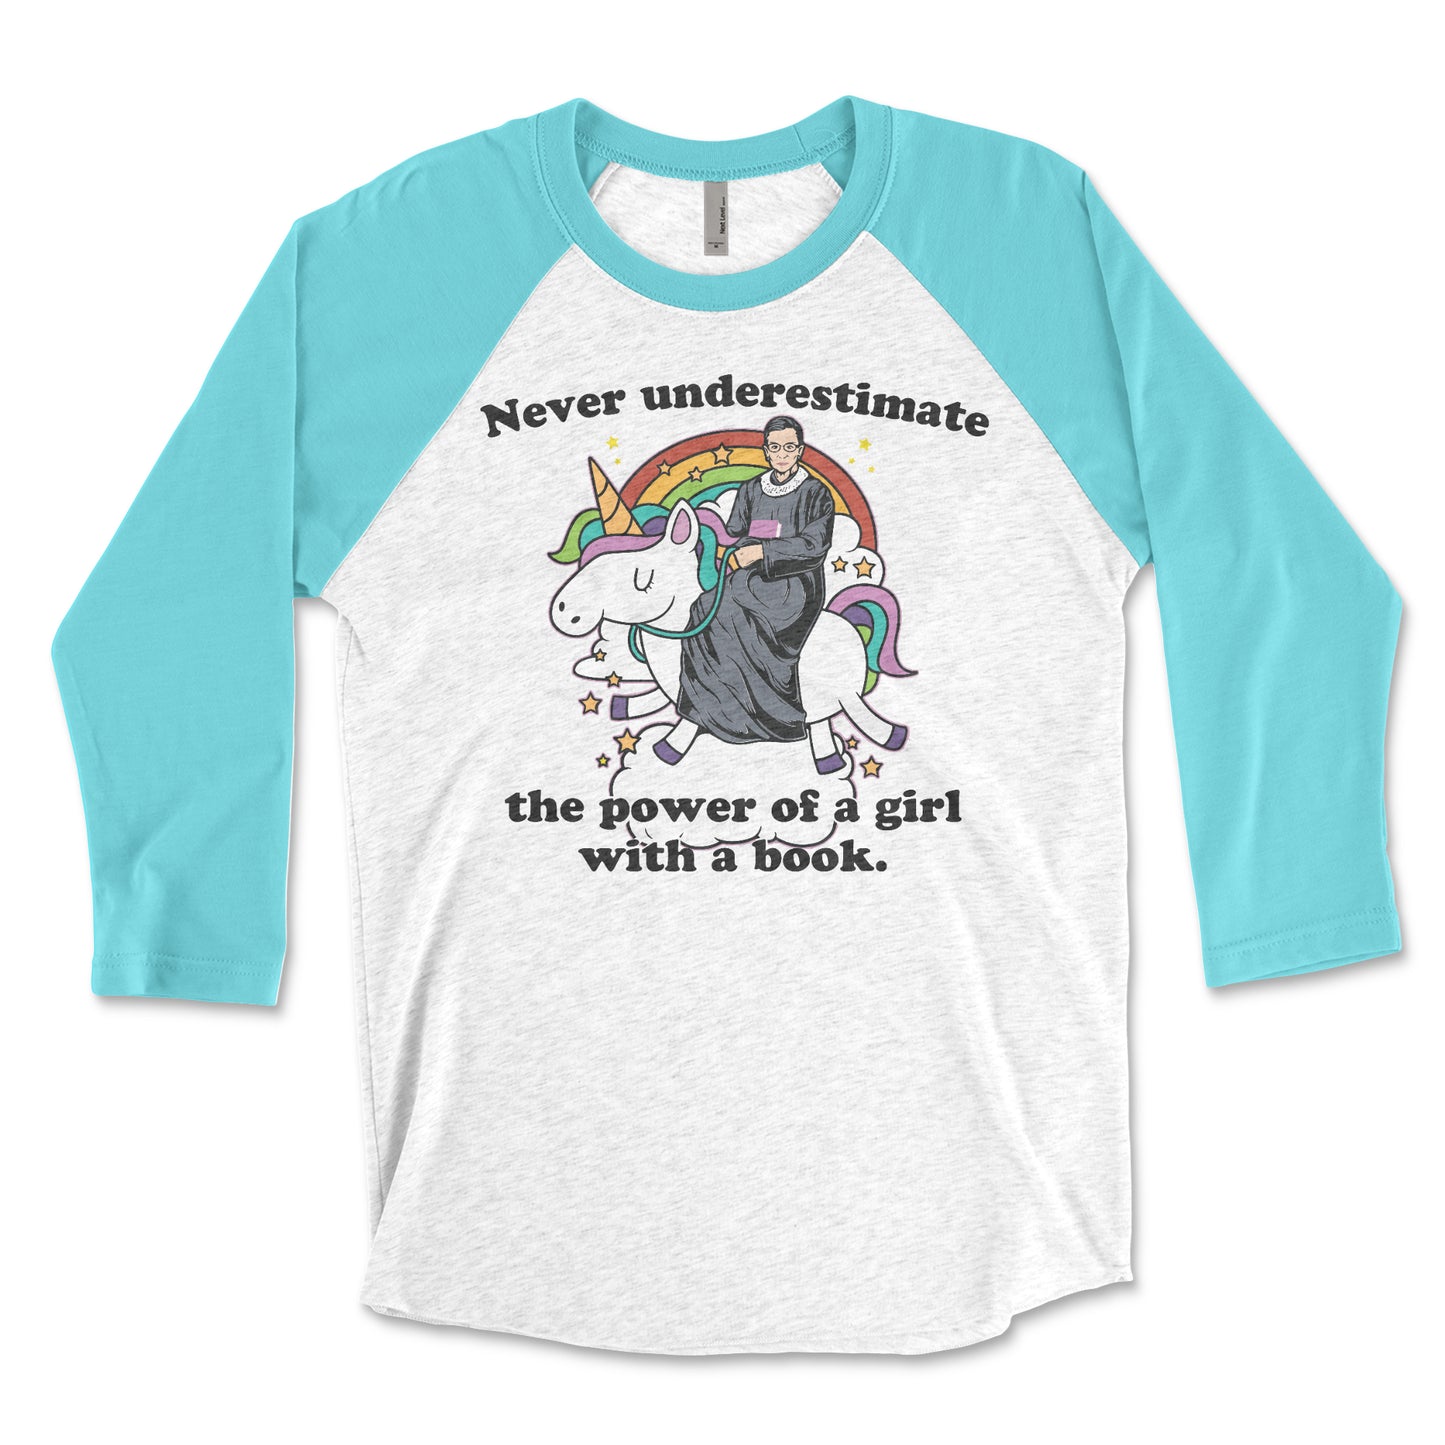 Never Underestimate the Power of a Girl with a Book RGB Unicorn 3/4 Sleeve Raglan T-shirt